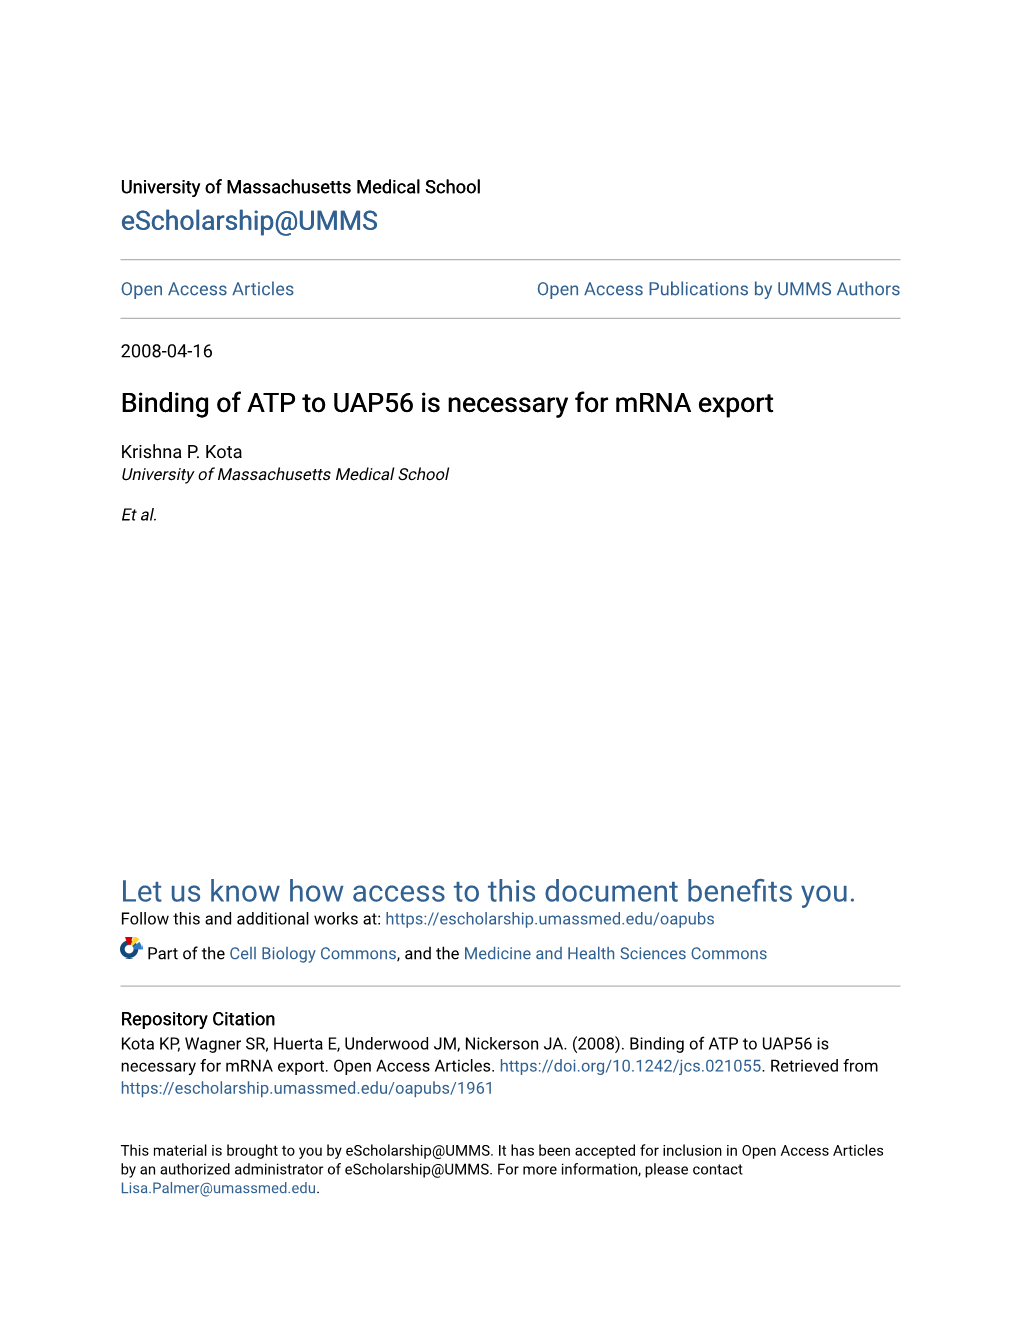 Binding of ATP to UAP56 Is Necessary for Mrna Export